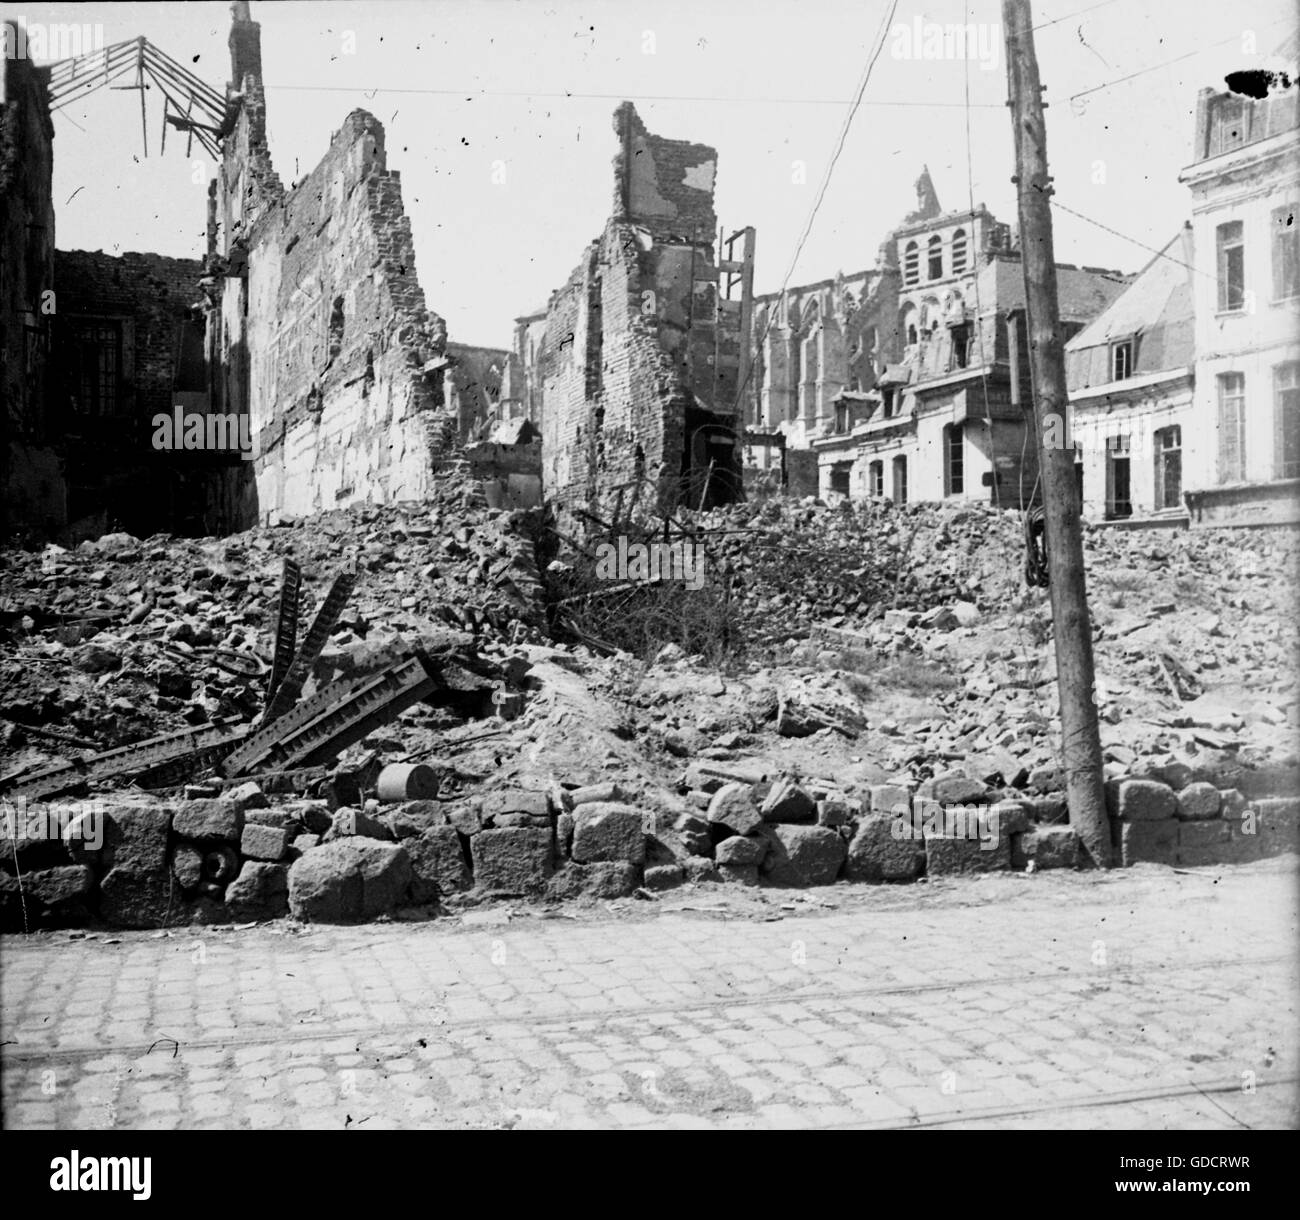 Scenes at the end of the 1st World War c1918/1919  Destruction at St. Quentin. from a set of glass plate photos taken by an un-named British Army Doctor  Photo by Tony Henshaw       Scanned direct from a stereo original negative from a rare archive record of original photography from a British Doctor photographing at the end of World War 1    © World copyright. Stock Photo